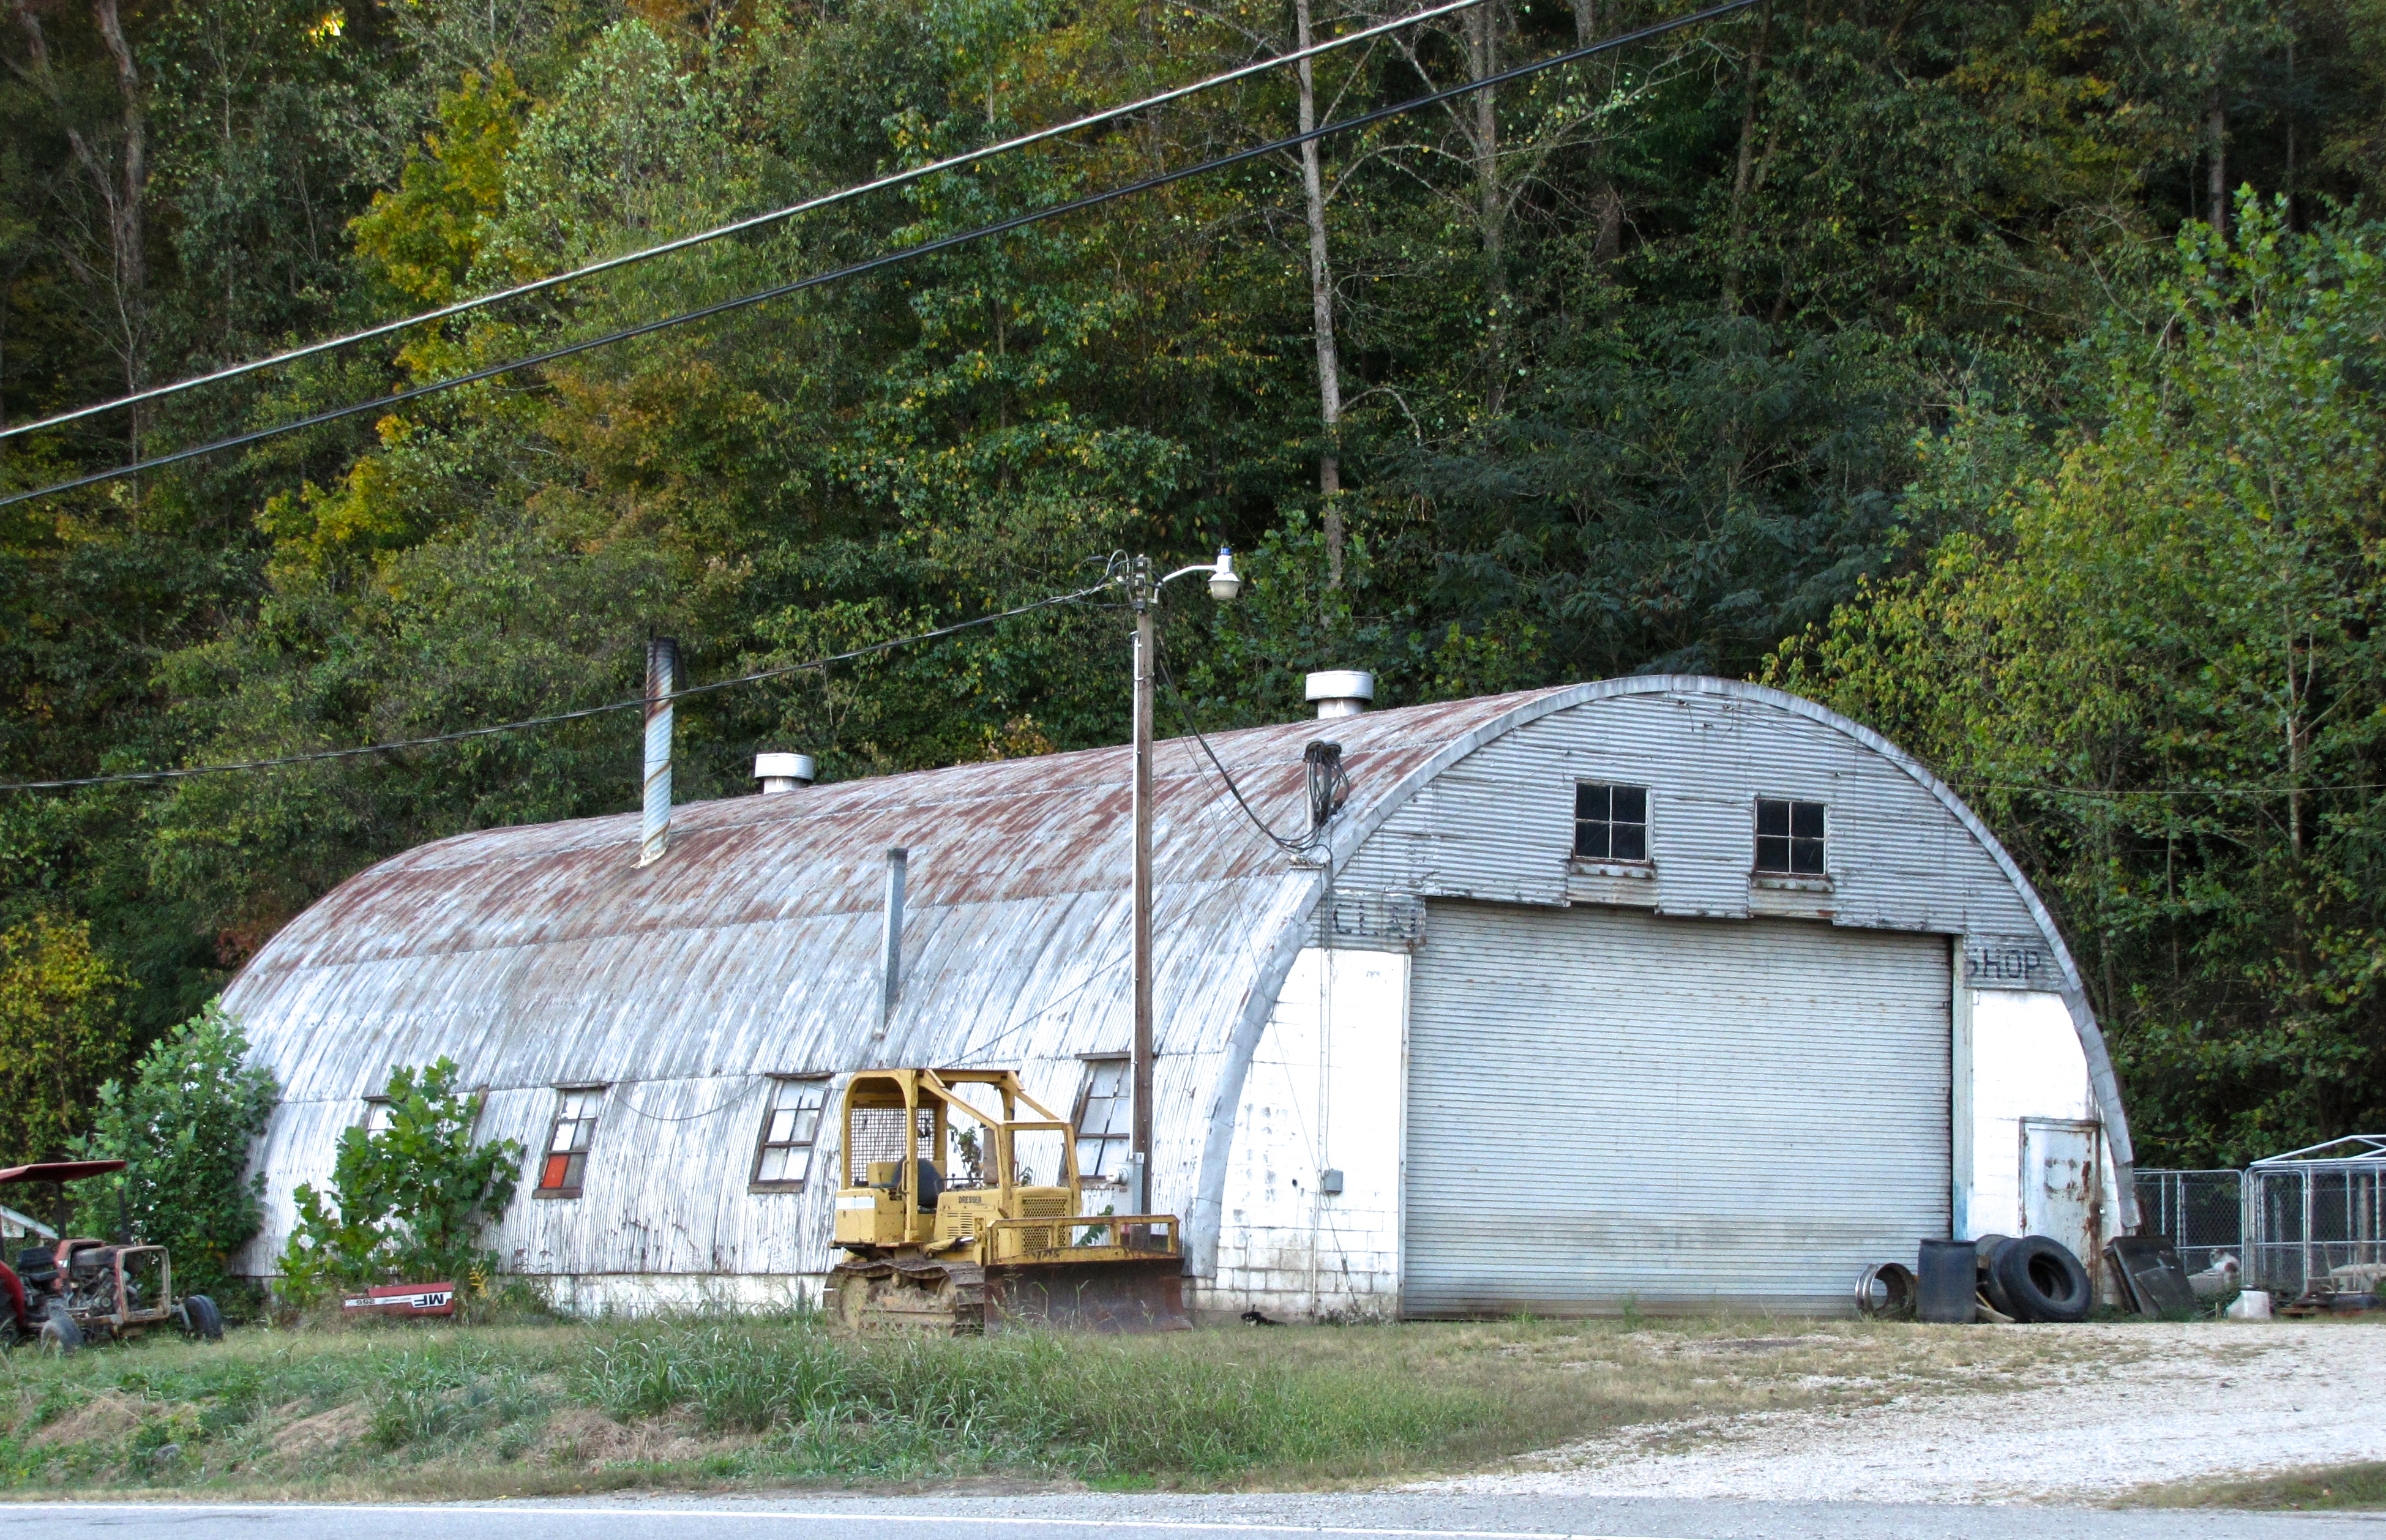 quonset hut in About Us, NC